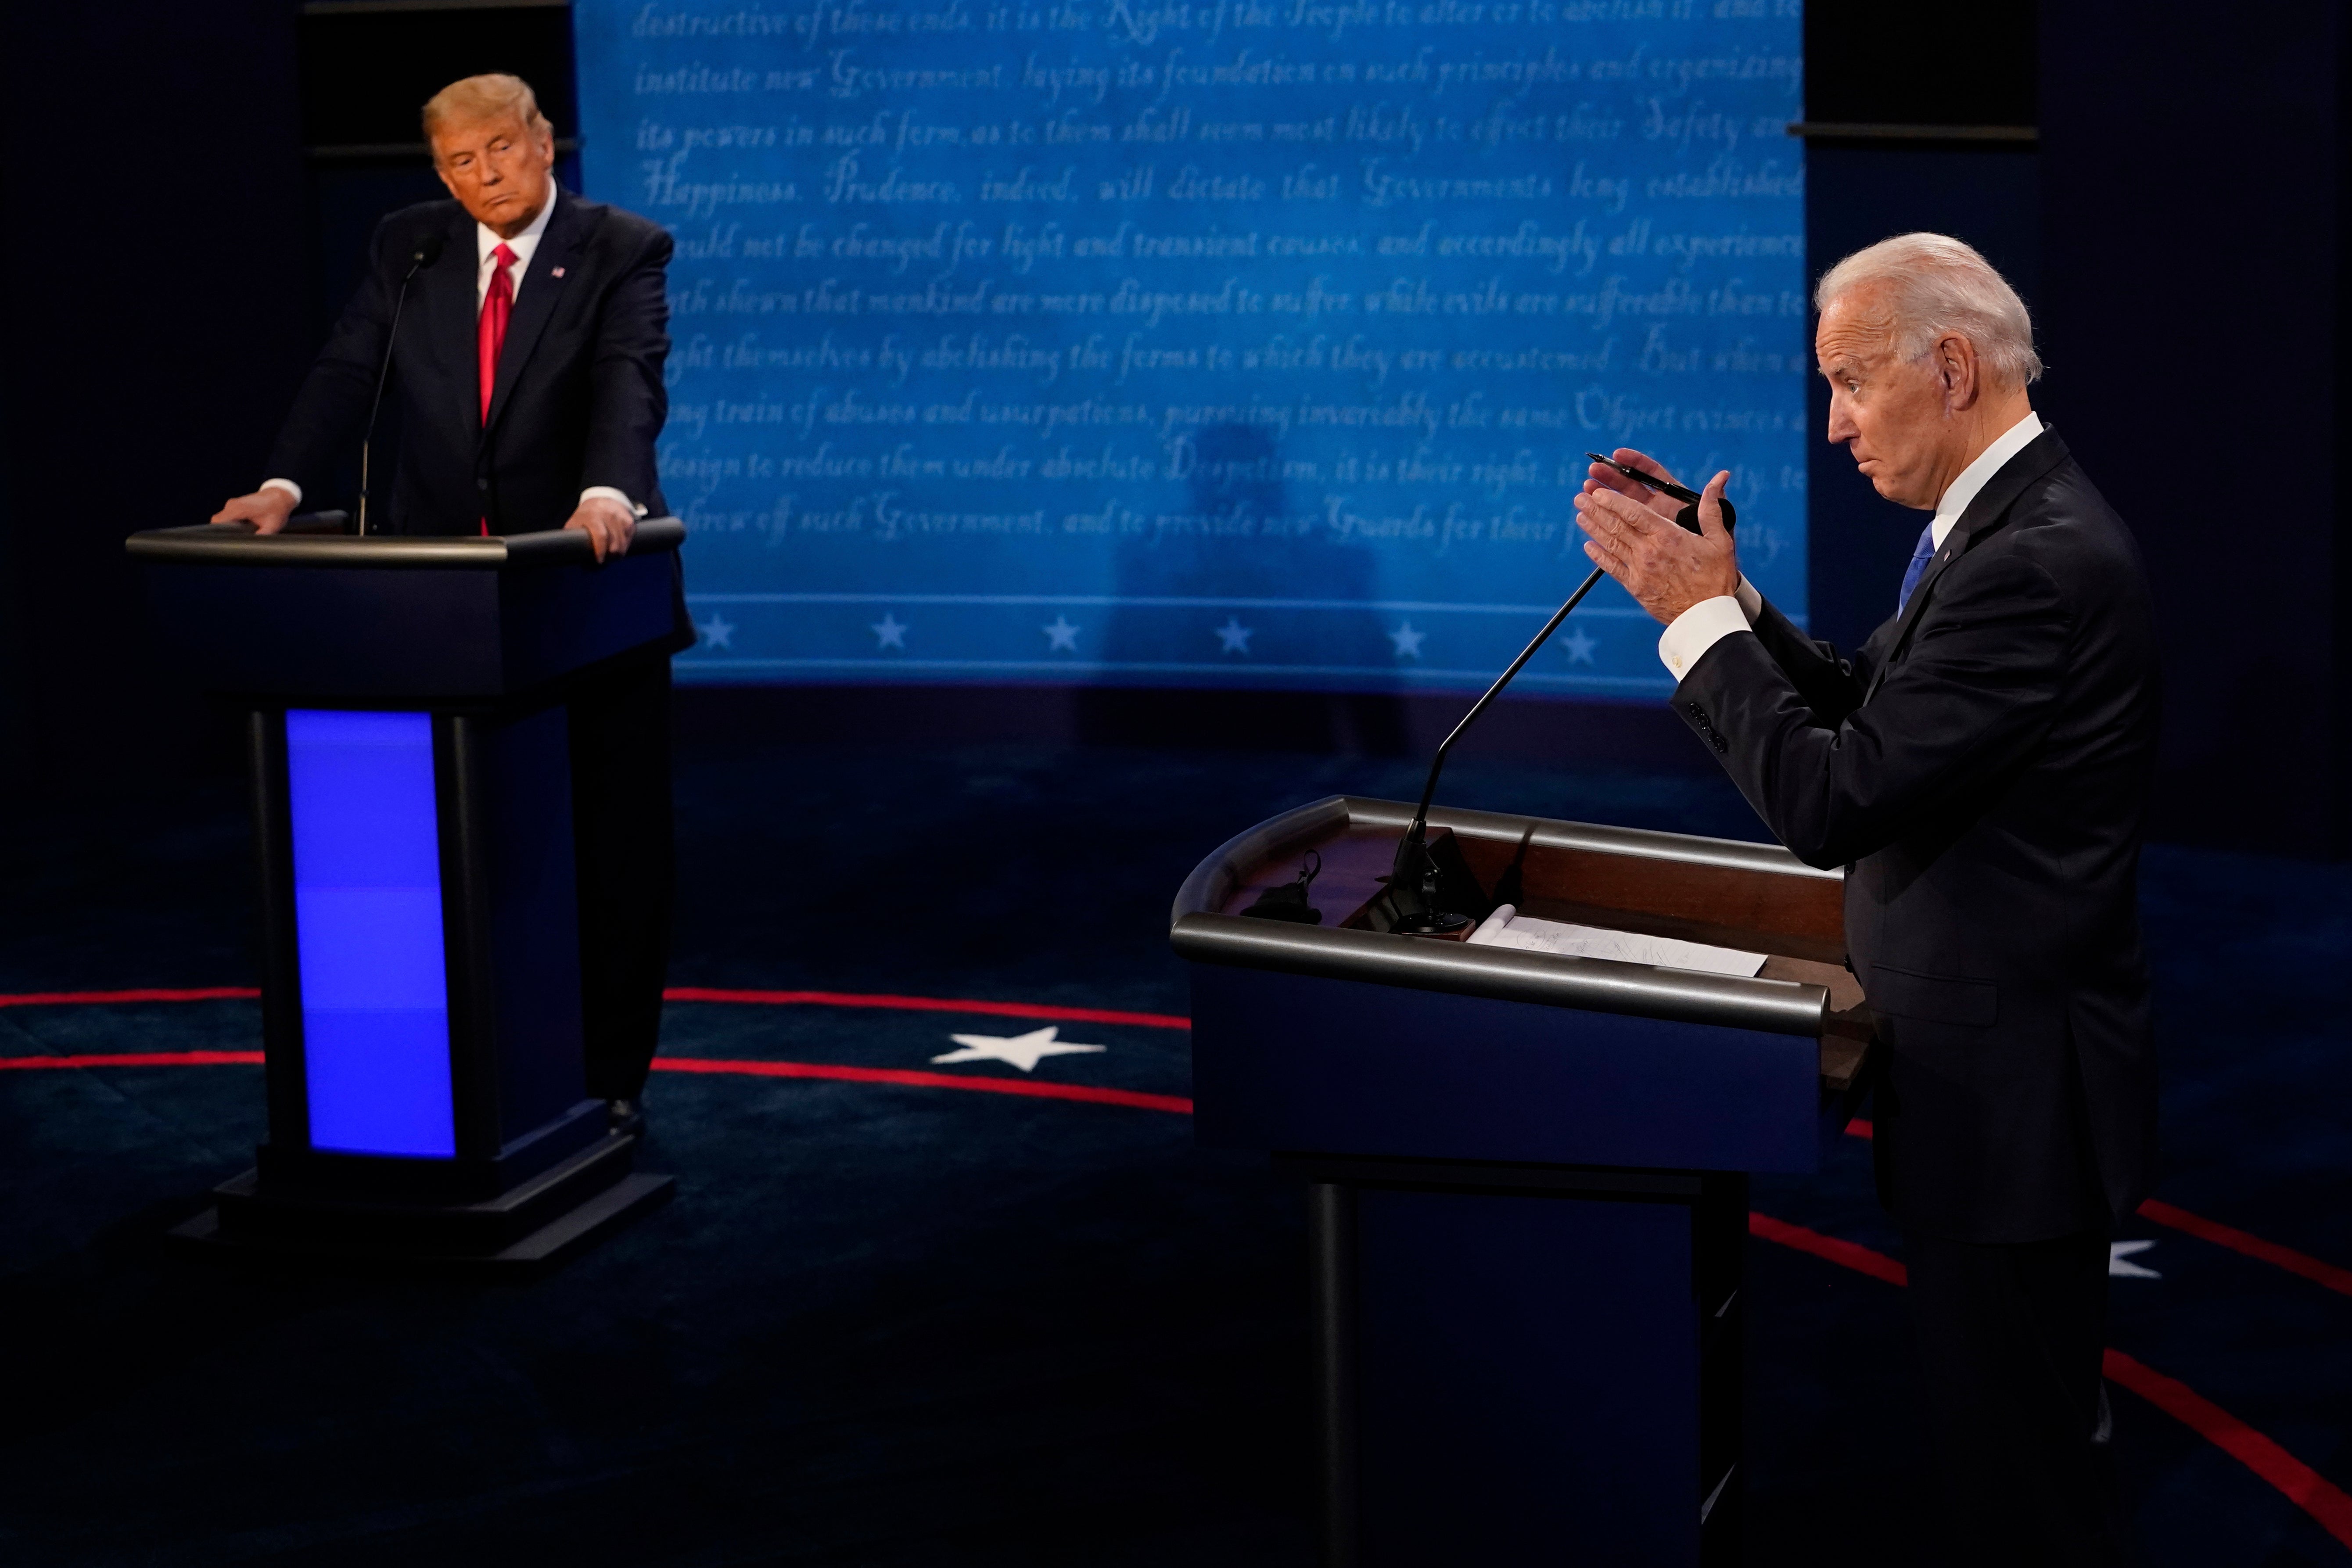 Biden and Trump last shared the stage in October 2020 during the Covid-19 pandemic